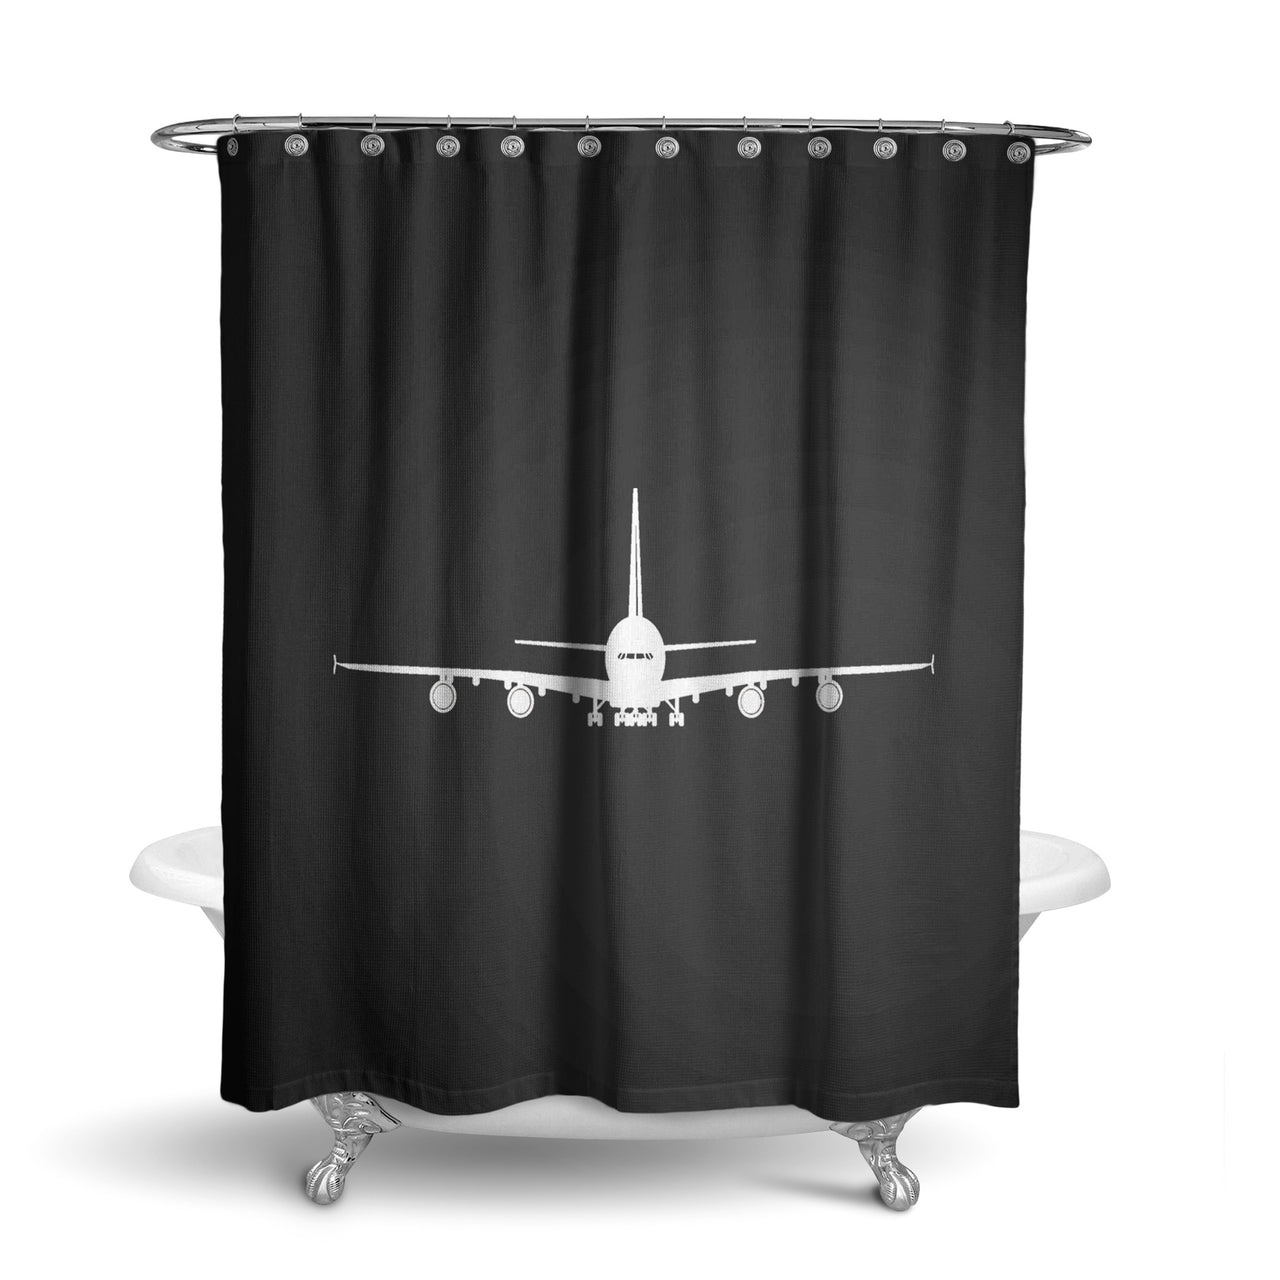 Airbus A380 Silhouette Designed Shower Curtains